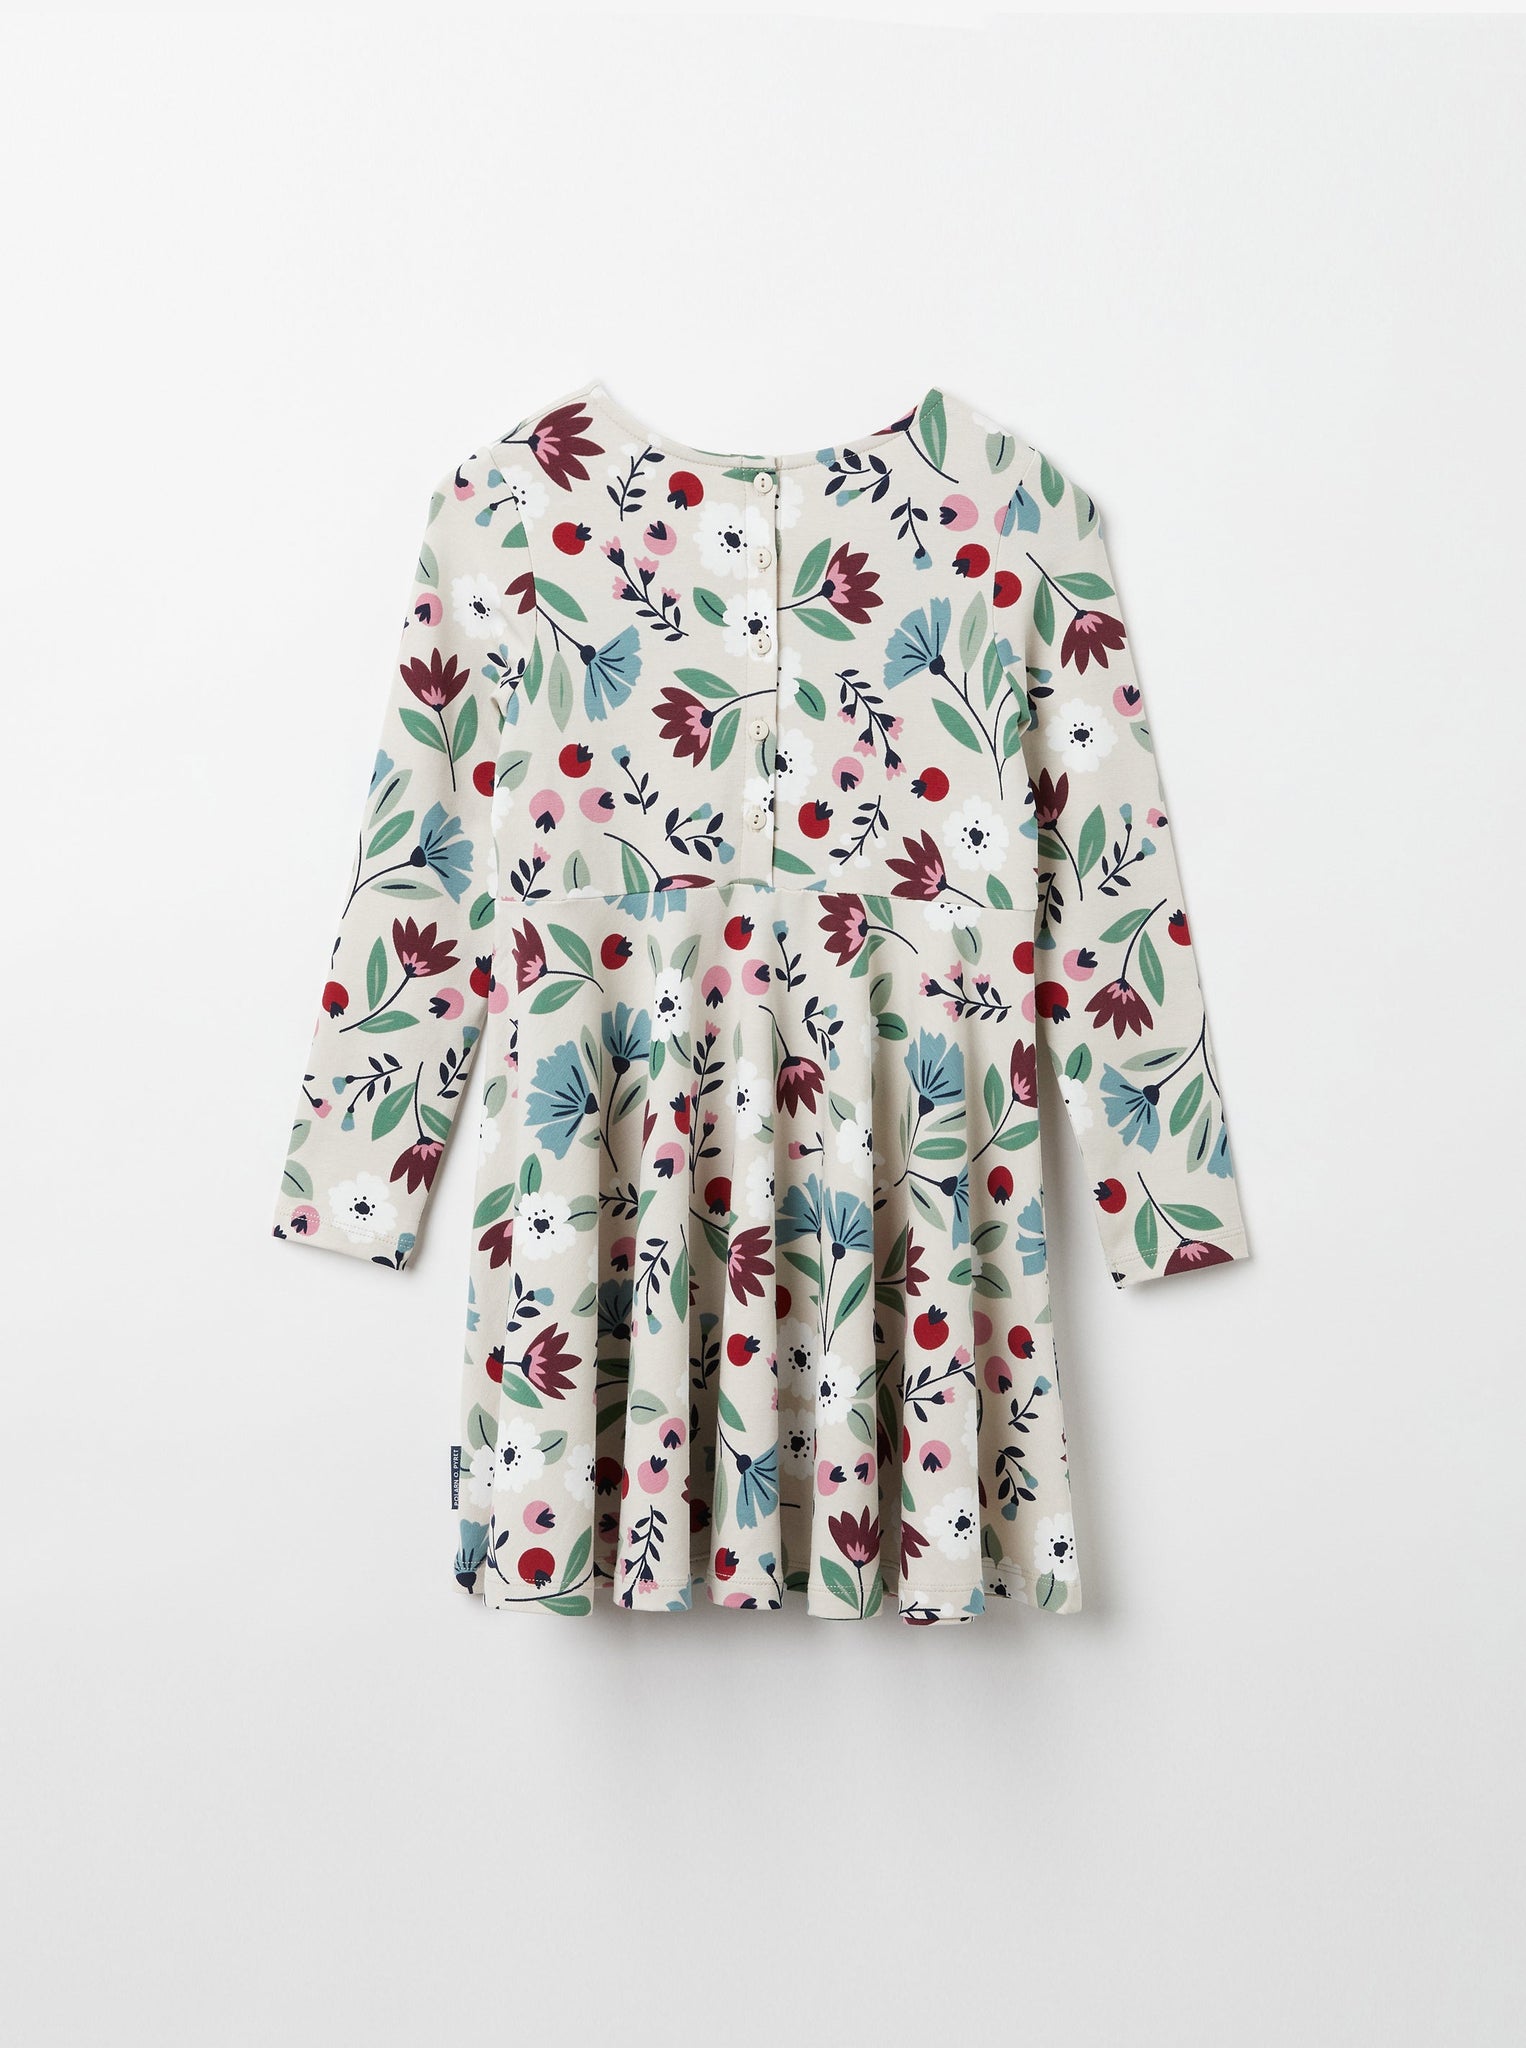 Organic Cotton Floral Print Kids Dress from the Polarn O. Pyret kidswear collection. Ethically produced kids clothing.